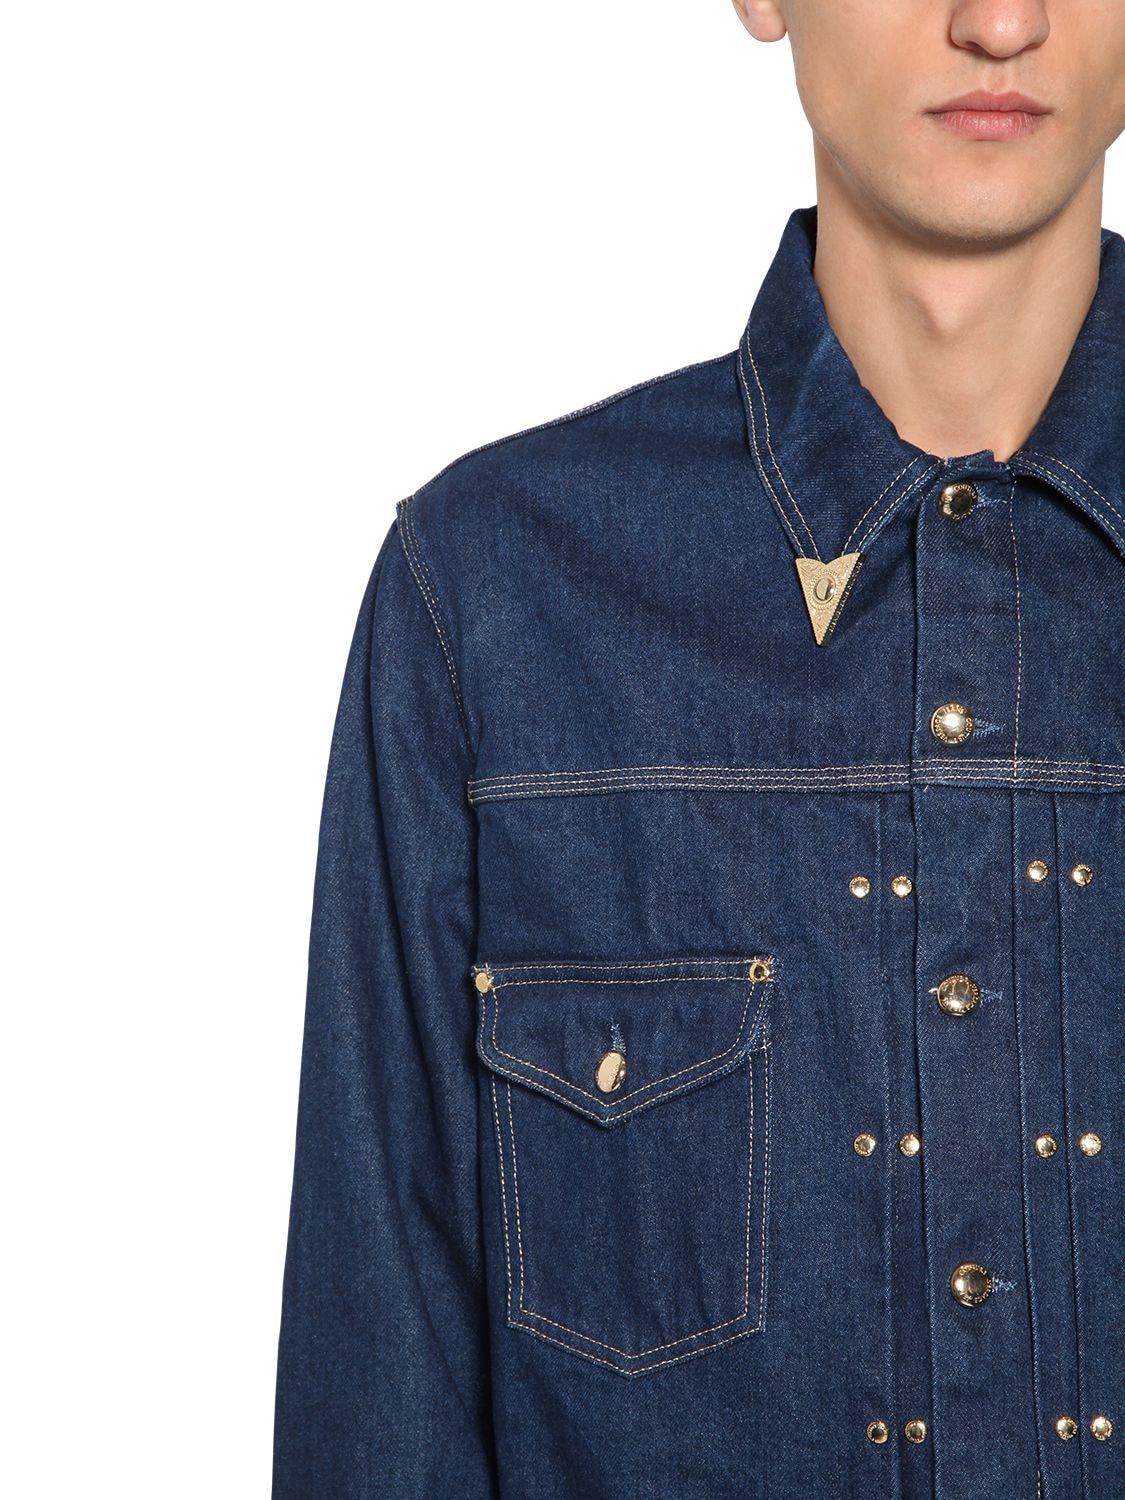 Versace Jeans Couture Denim Jacket W/western Details in Blue for Men - Lyst